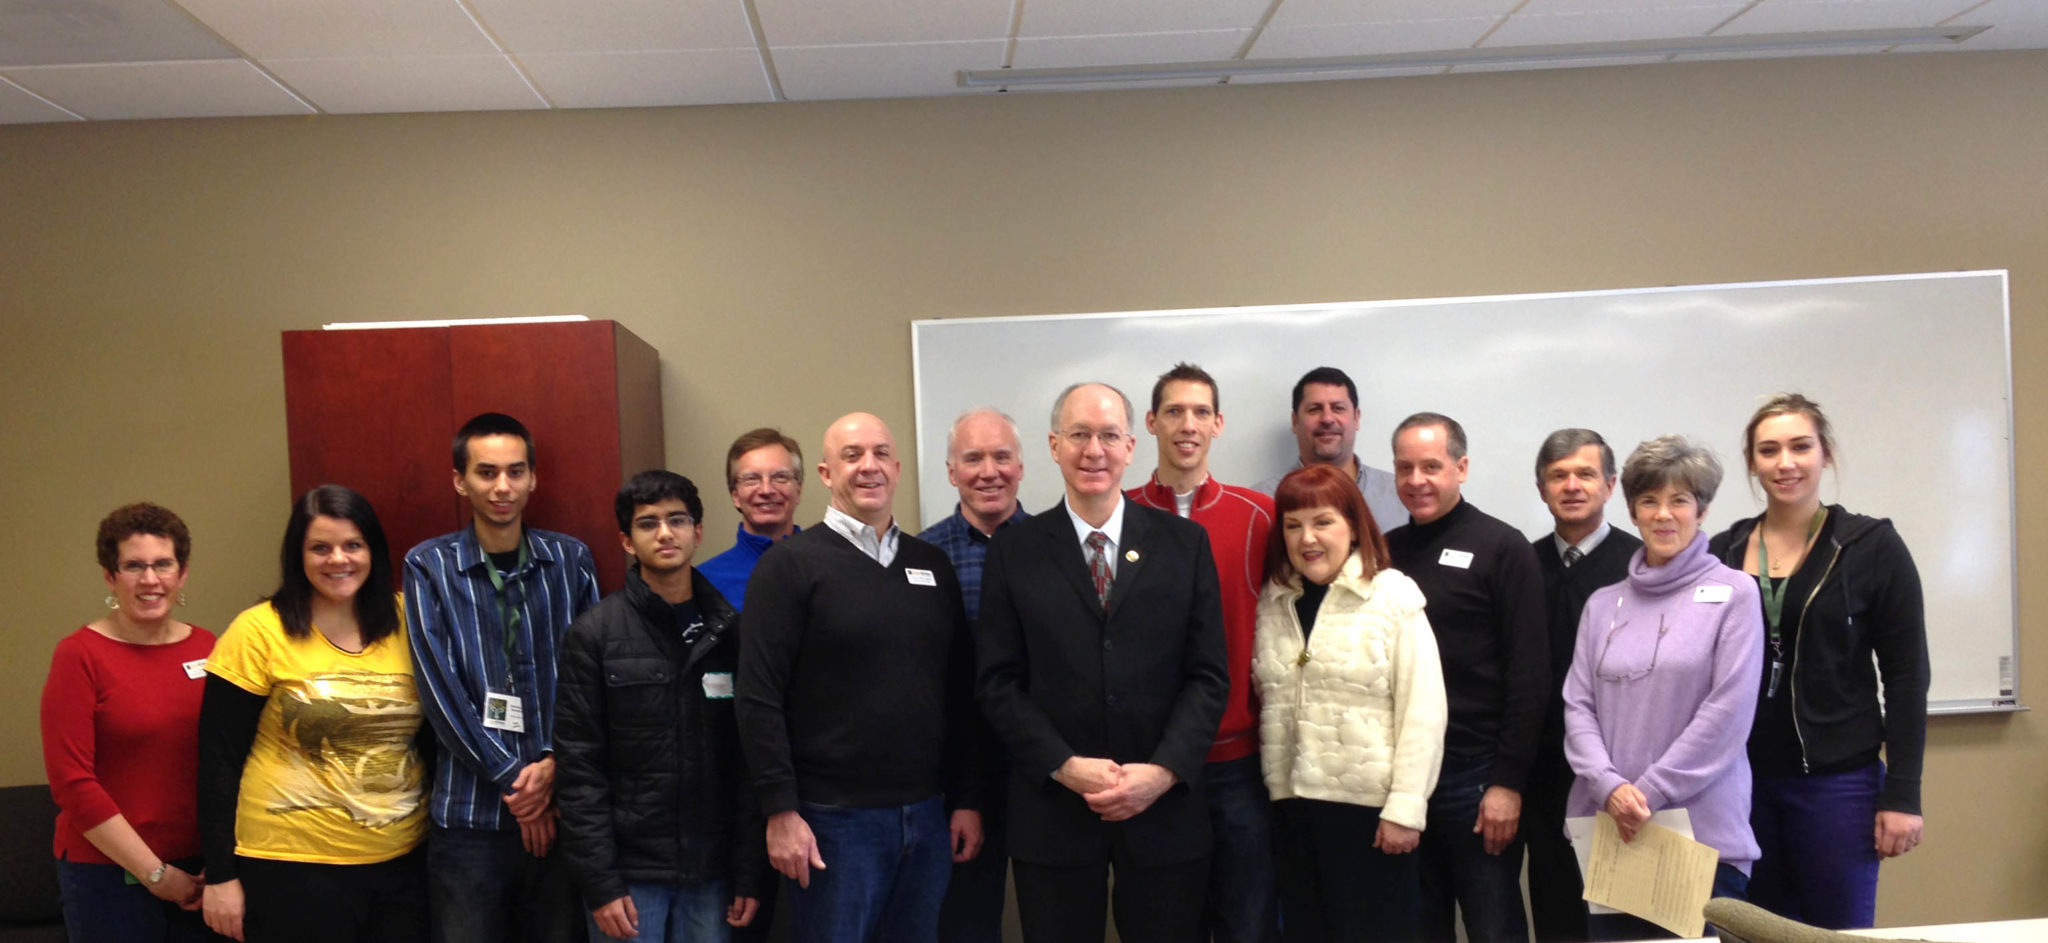 Congressman Bill Foster is pictured with Loaves & Fishes staff and volunteers.